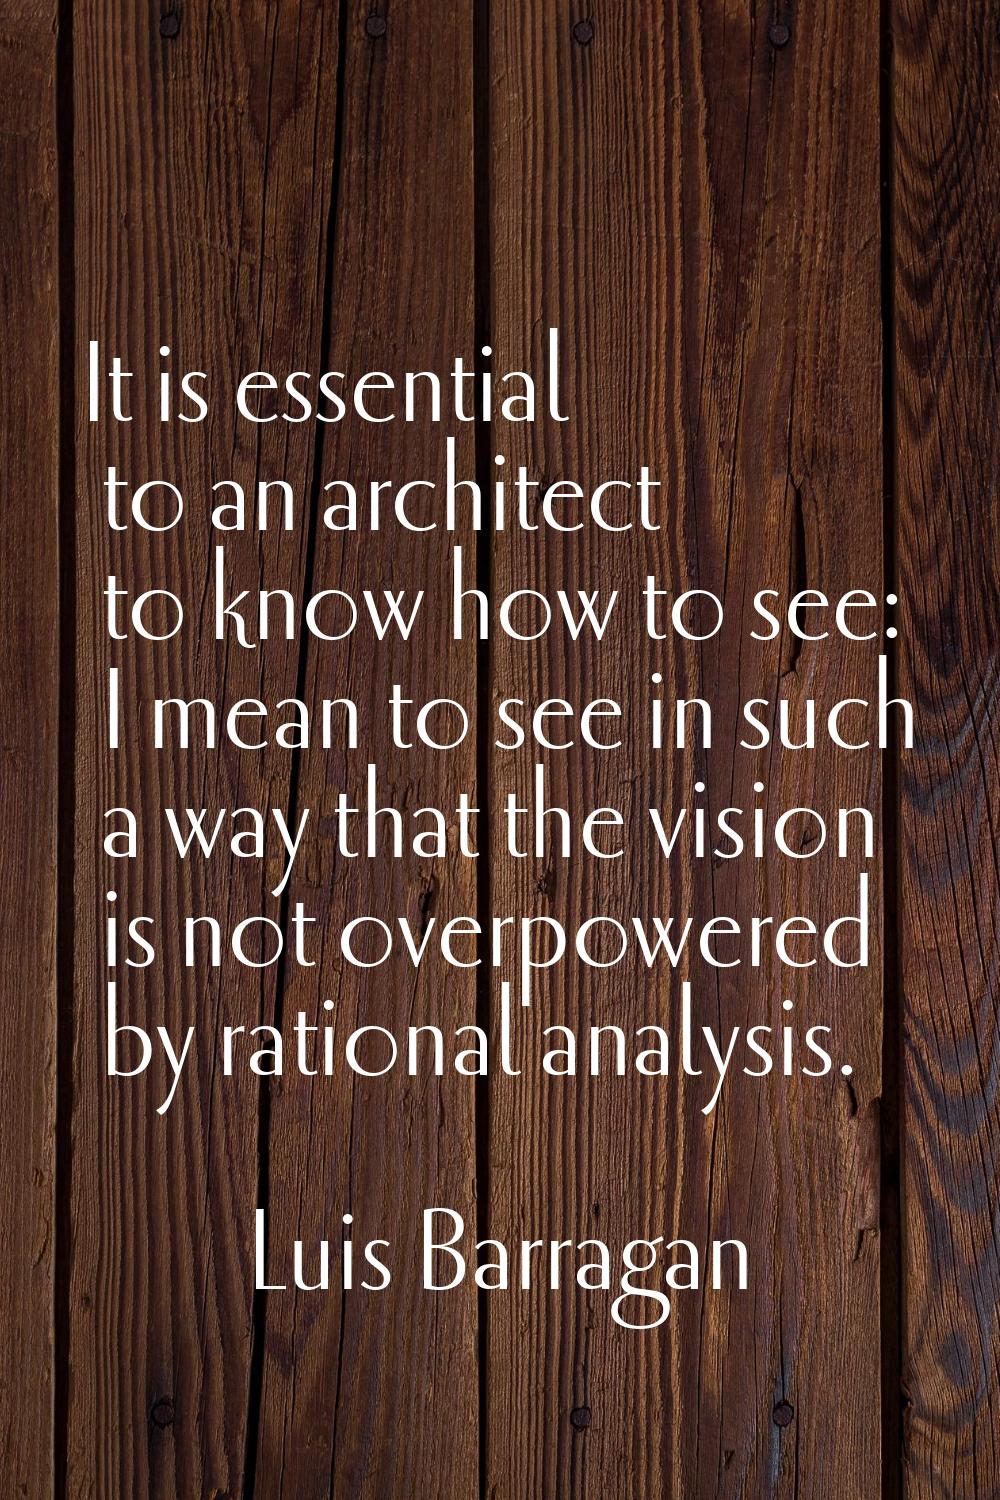 It is essential to an architect to know how to see: I mean to see in such a way that the vision is 